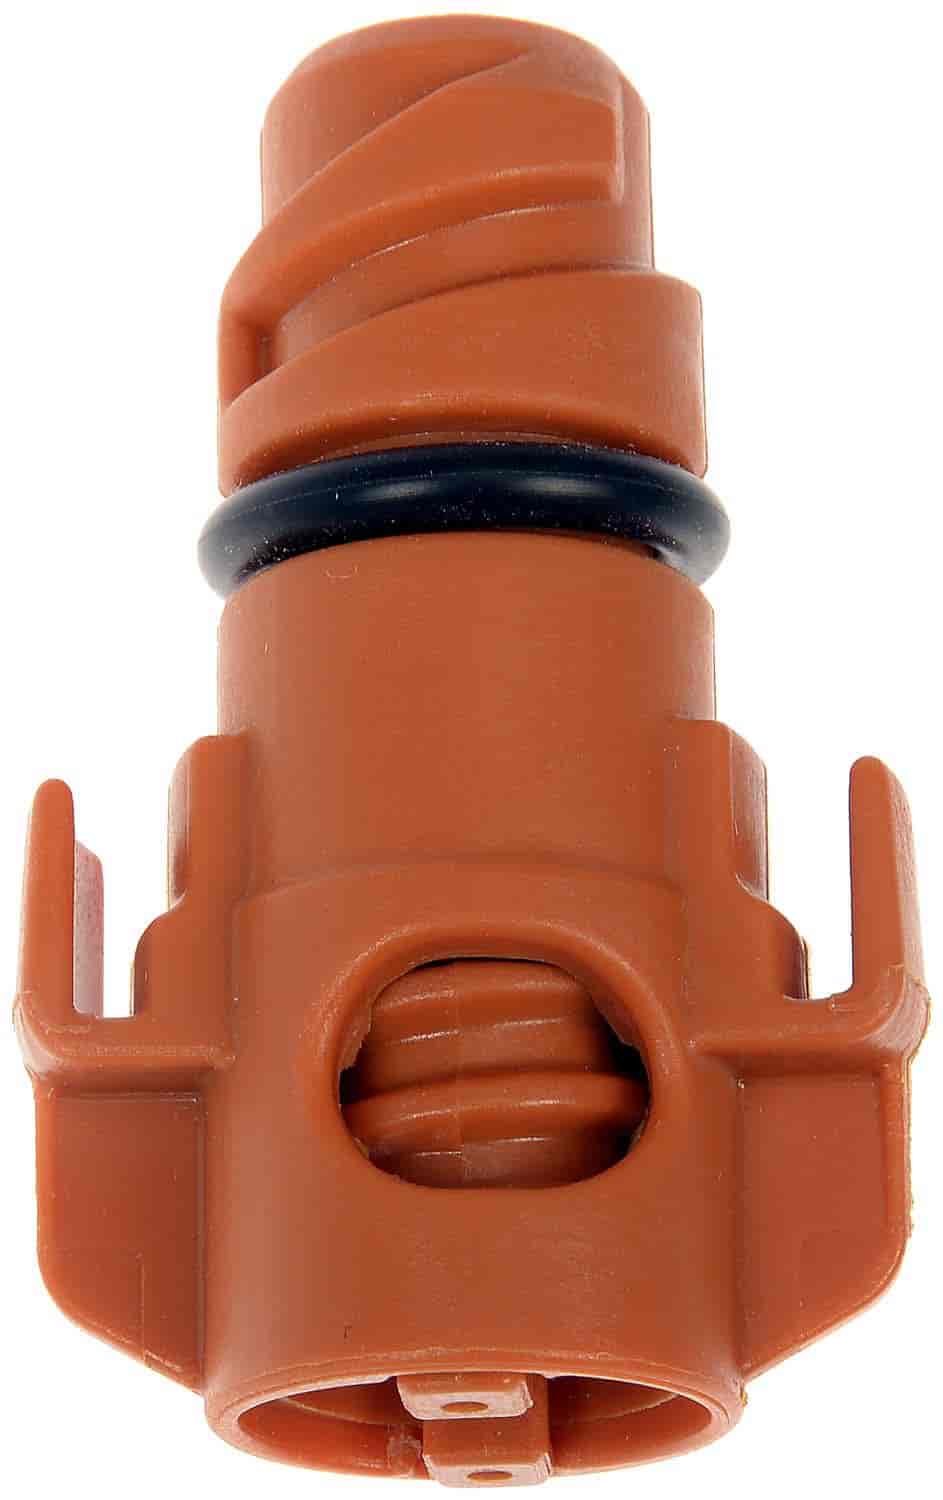 Thermoplastic Oil Drain Plug Fits Select Ford/Lincoln V6/V8 Models